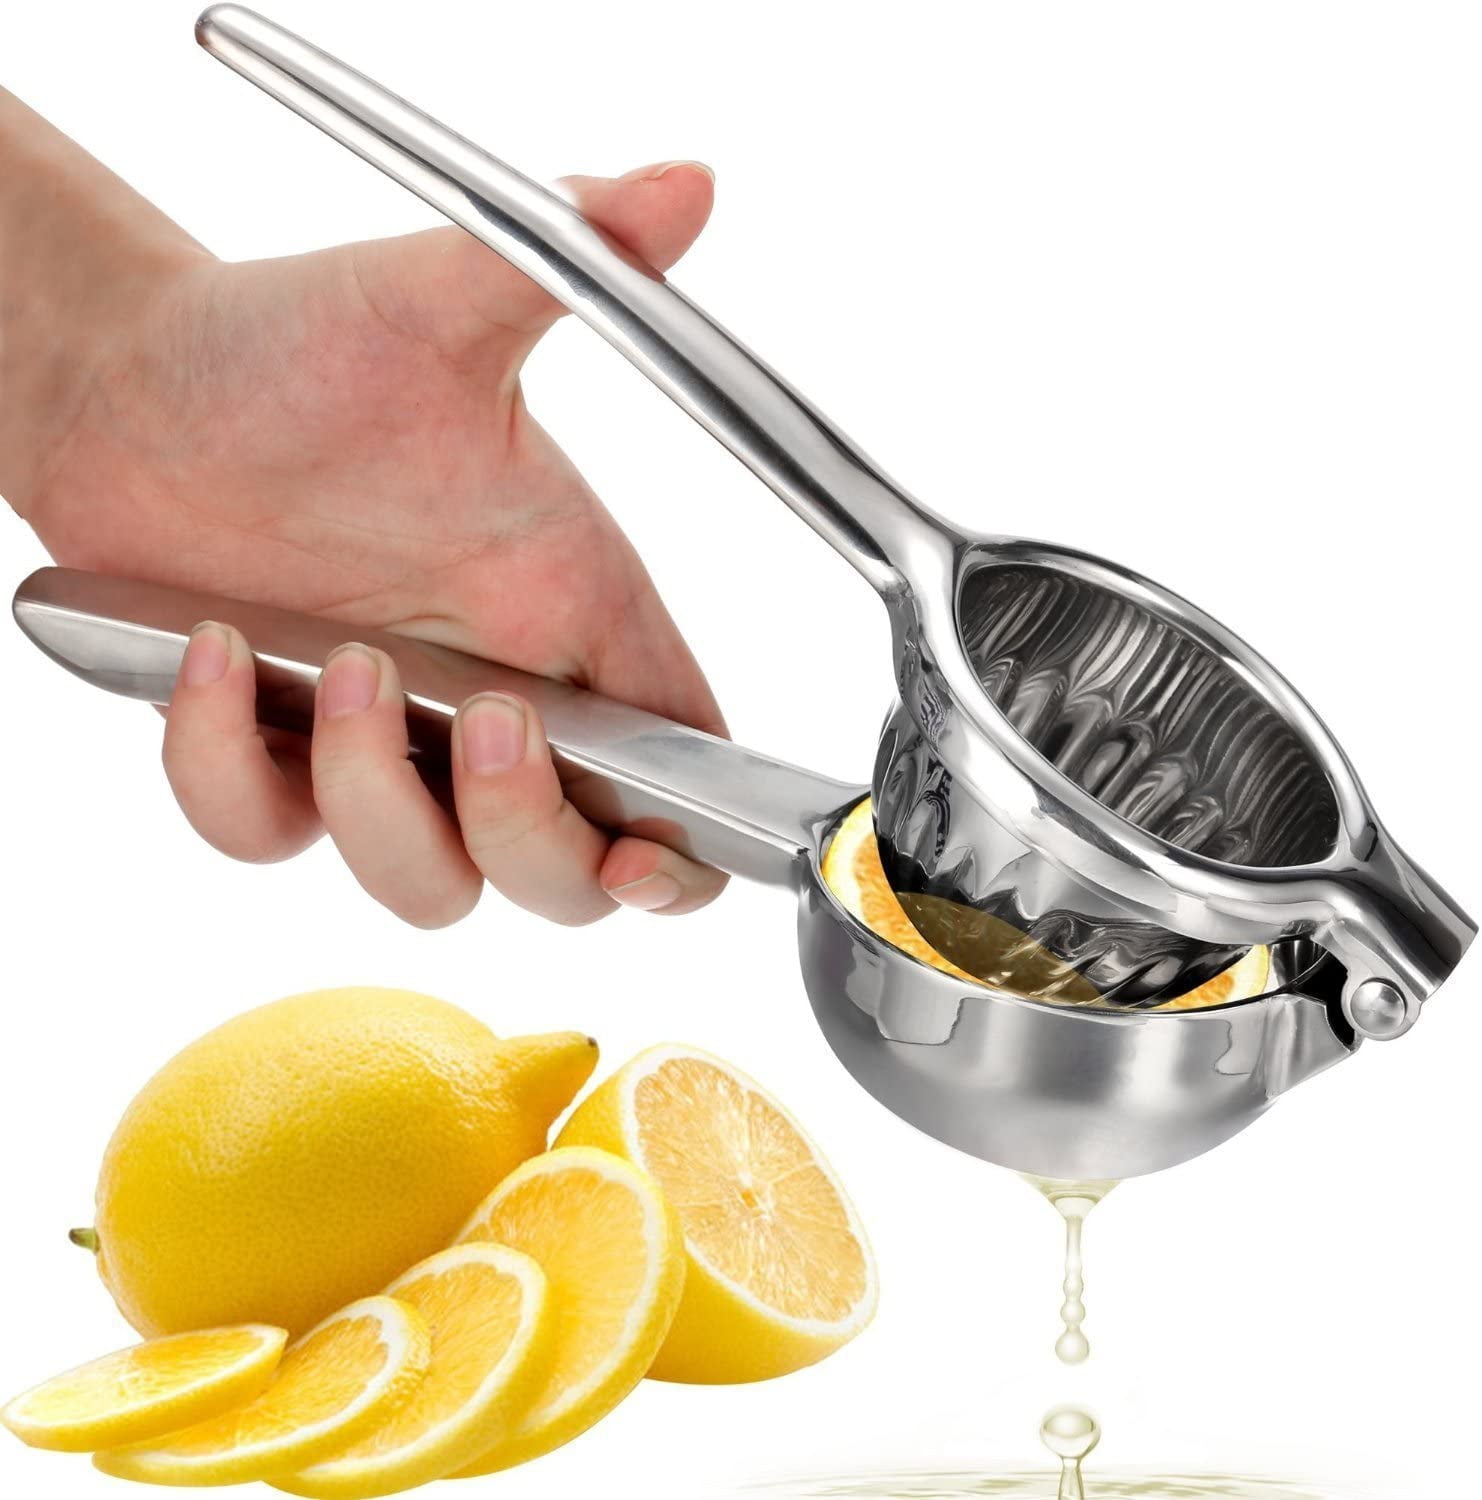 USA SELLER LEMON/LIME SQUEEZER W/STRAINER 18/8 STAINLESS STEEL FREE SHIP US ONLY 